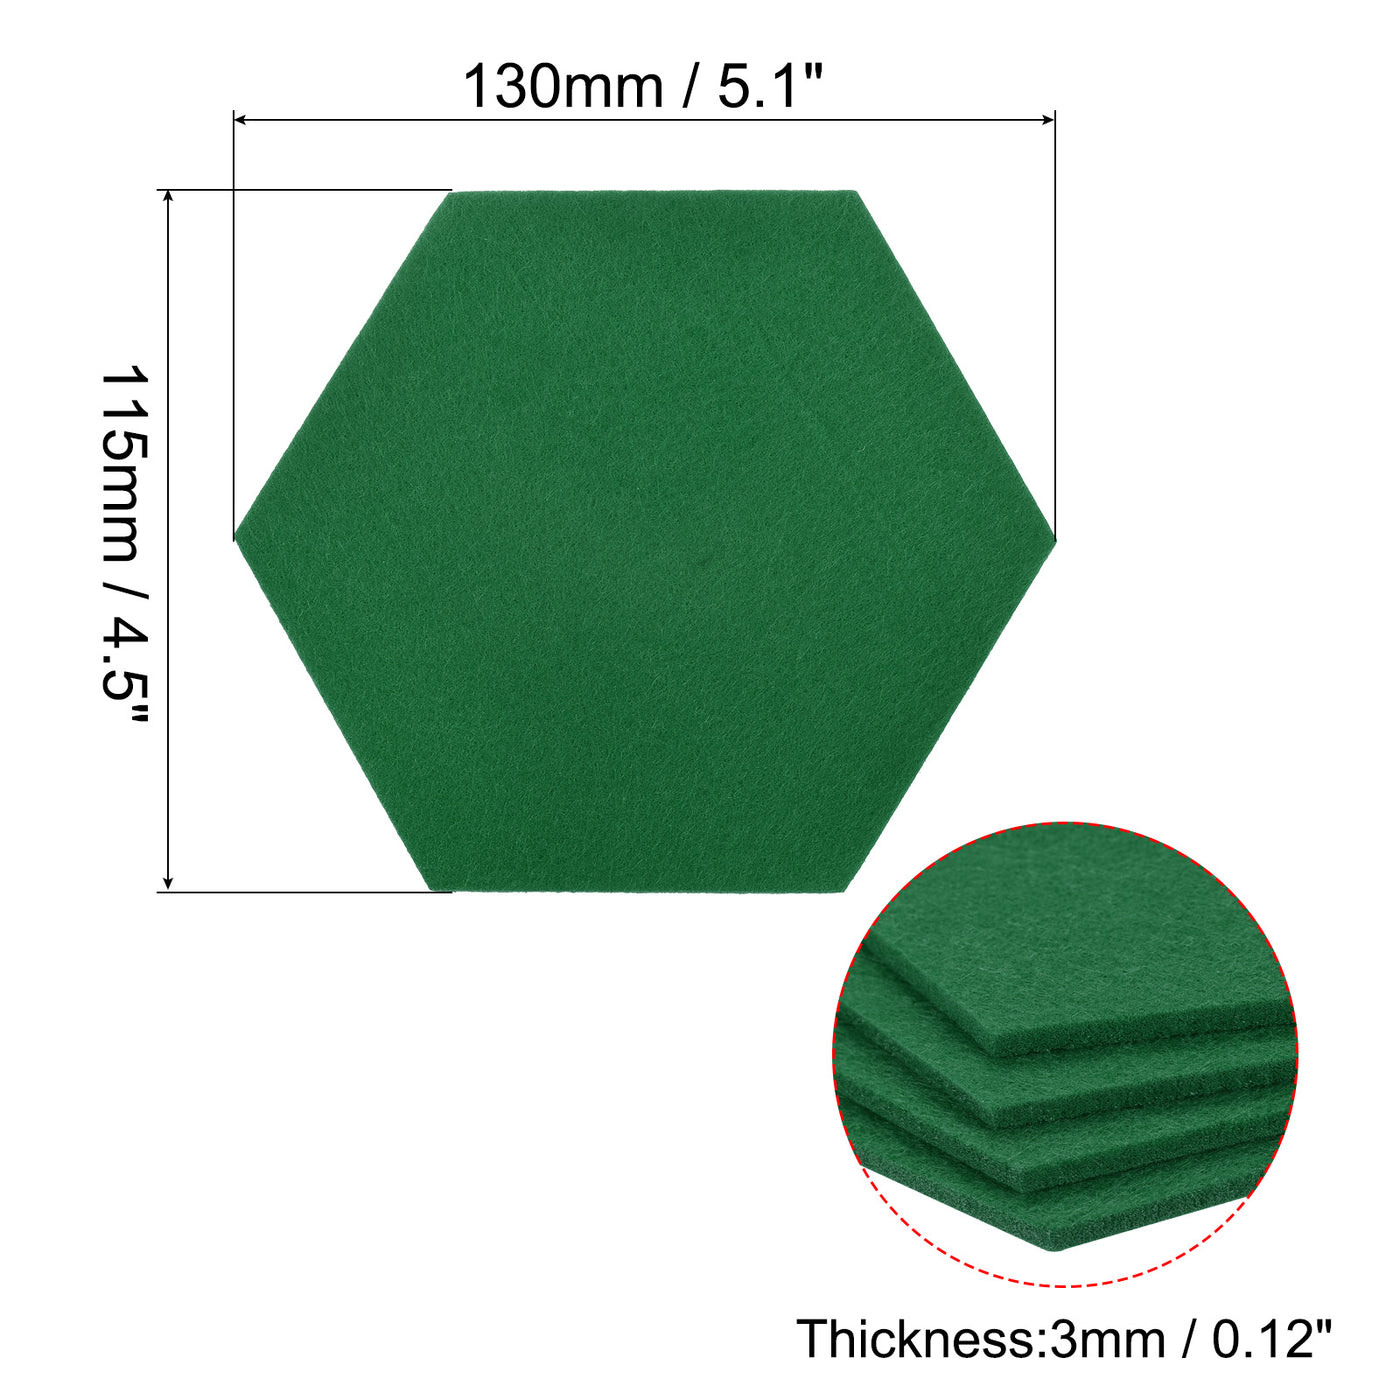 uxcell Uxcell Felt Coasters 9pcs Absorbent Pad Coaster for Drink Cup Pot Bowl Vase Green